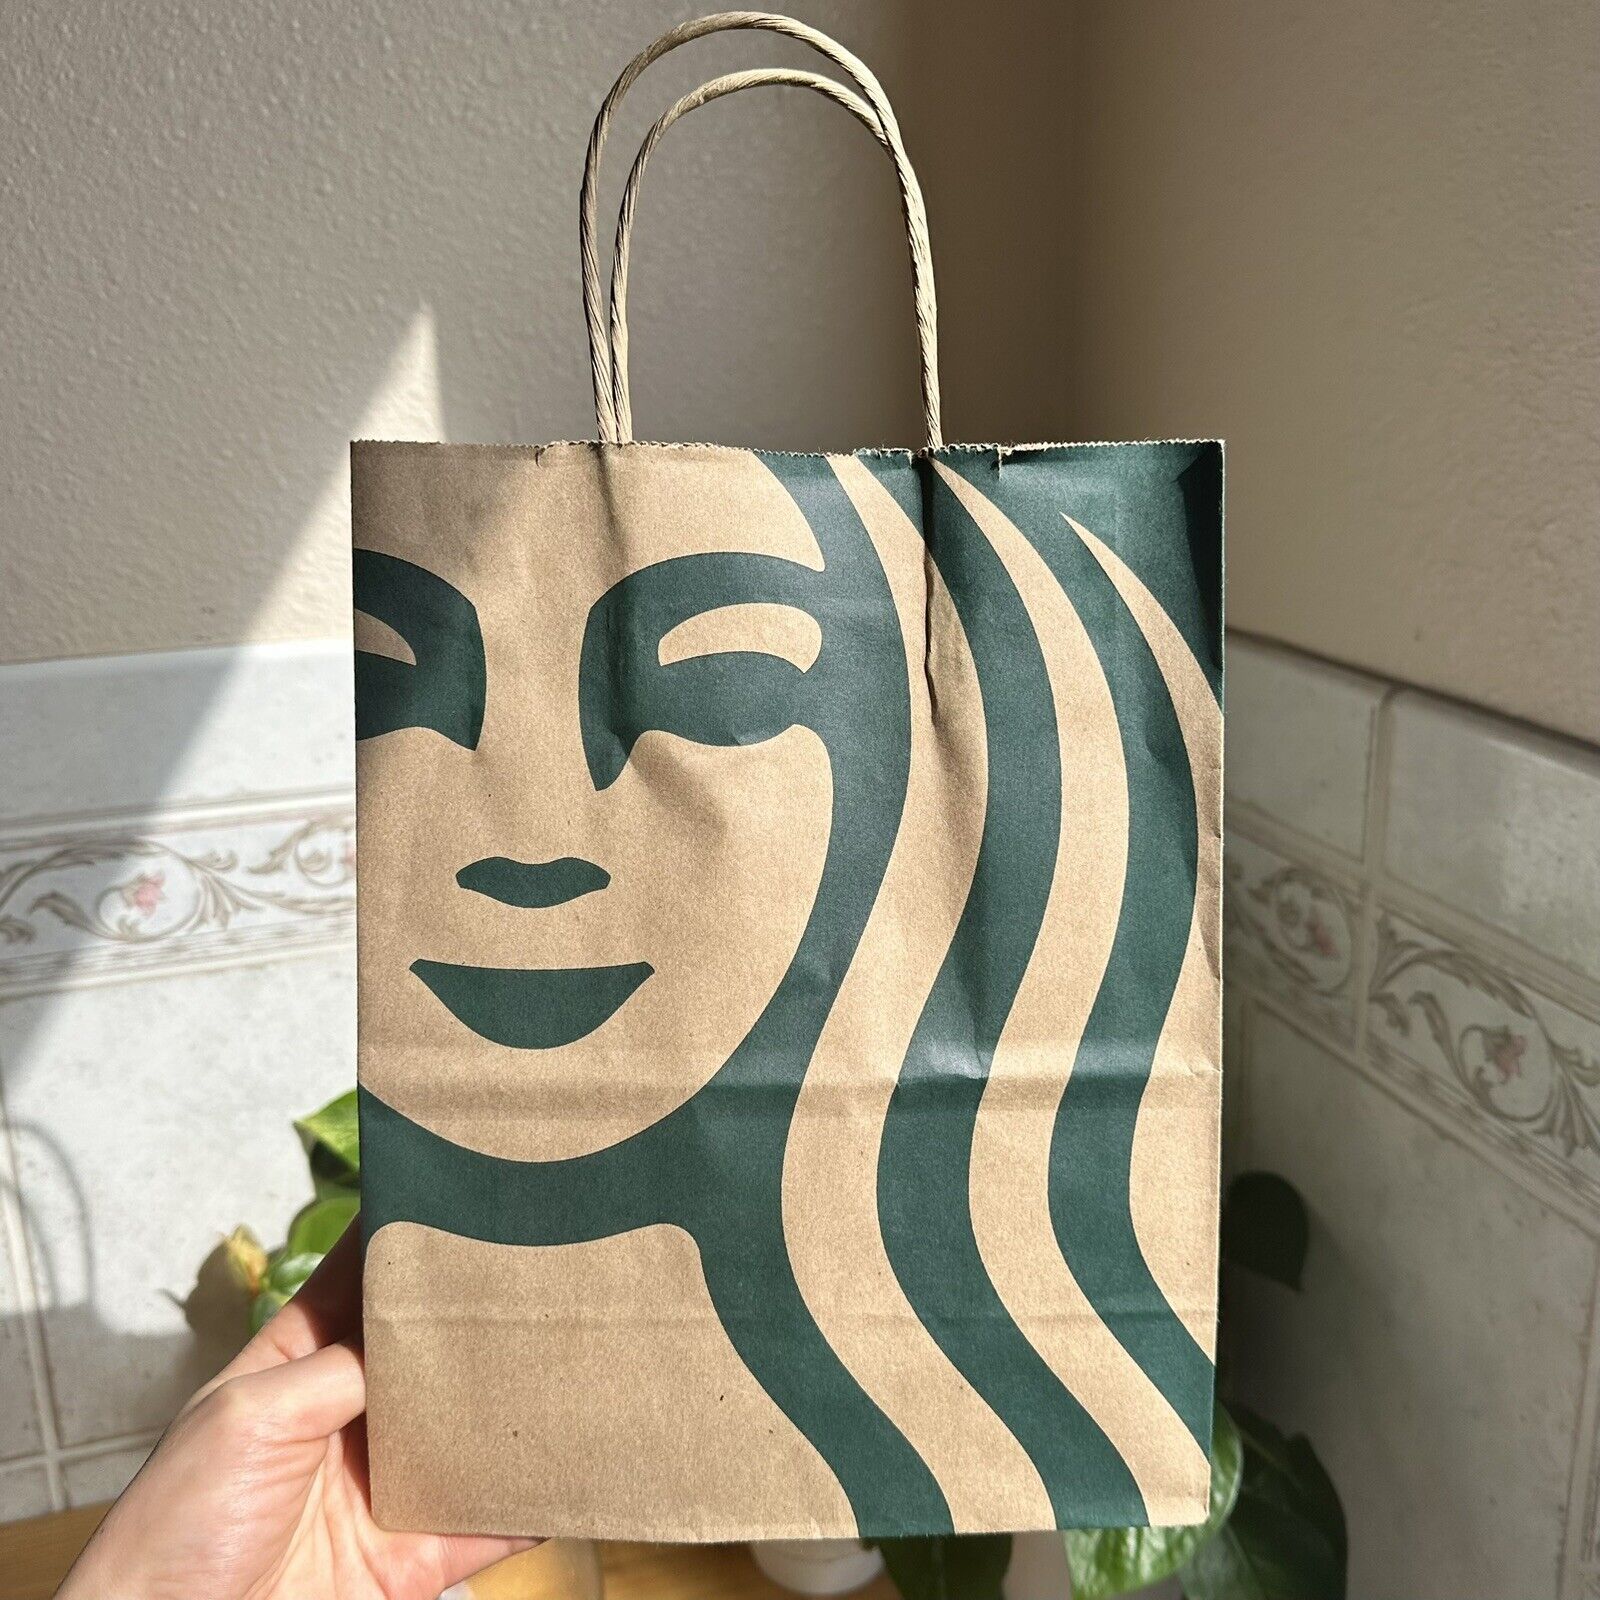 Starbucks 10 x Reusable Recycled Brown Paper Shopping Lunch Gift Bags w/ Handles